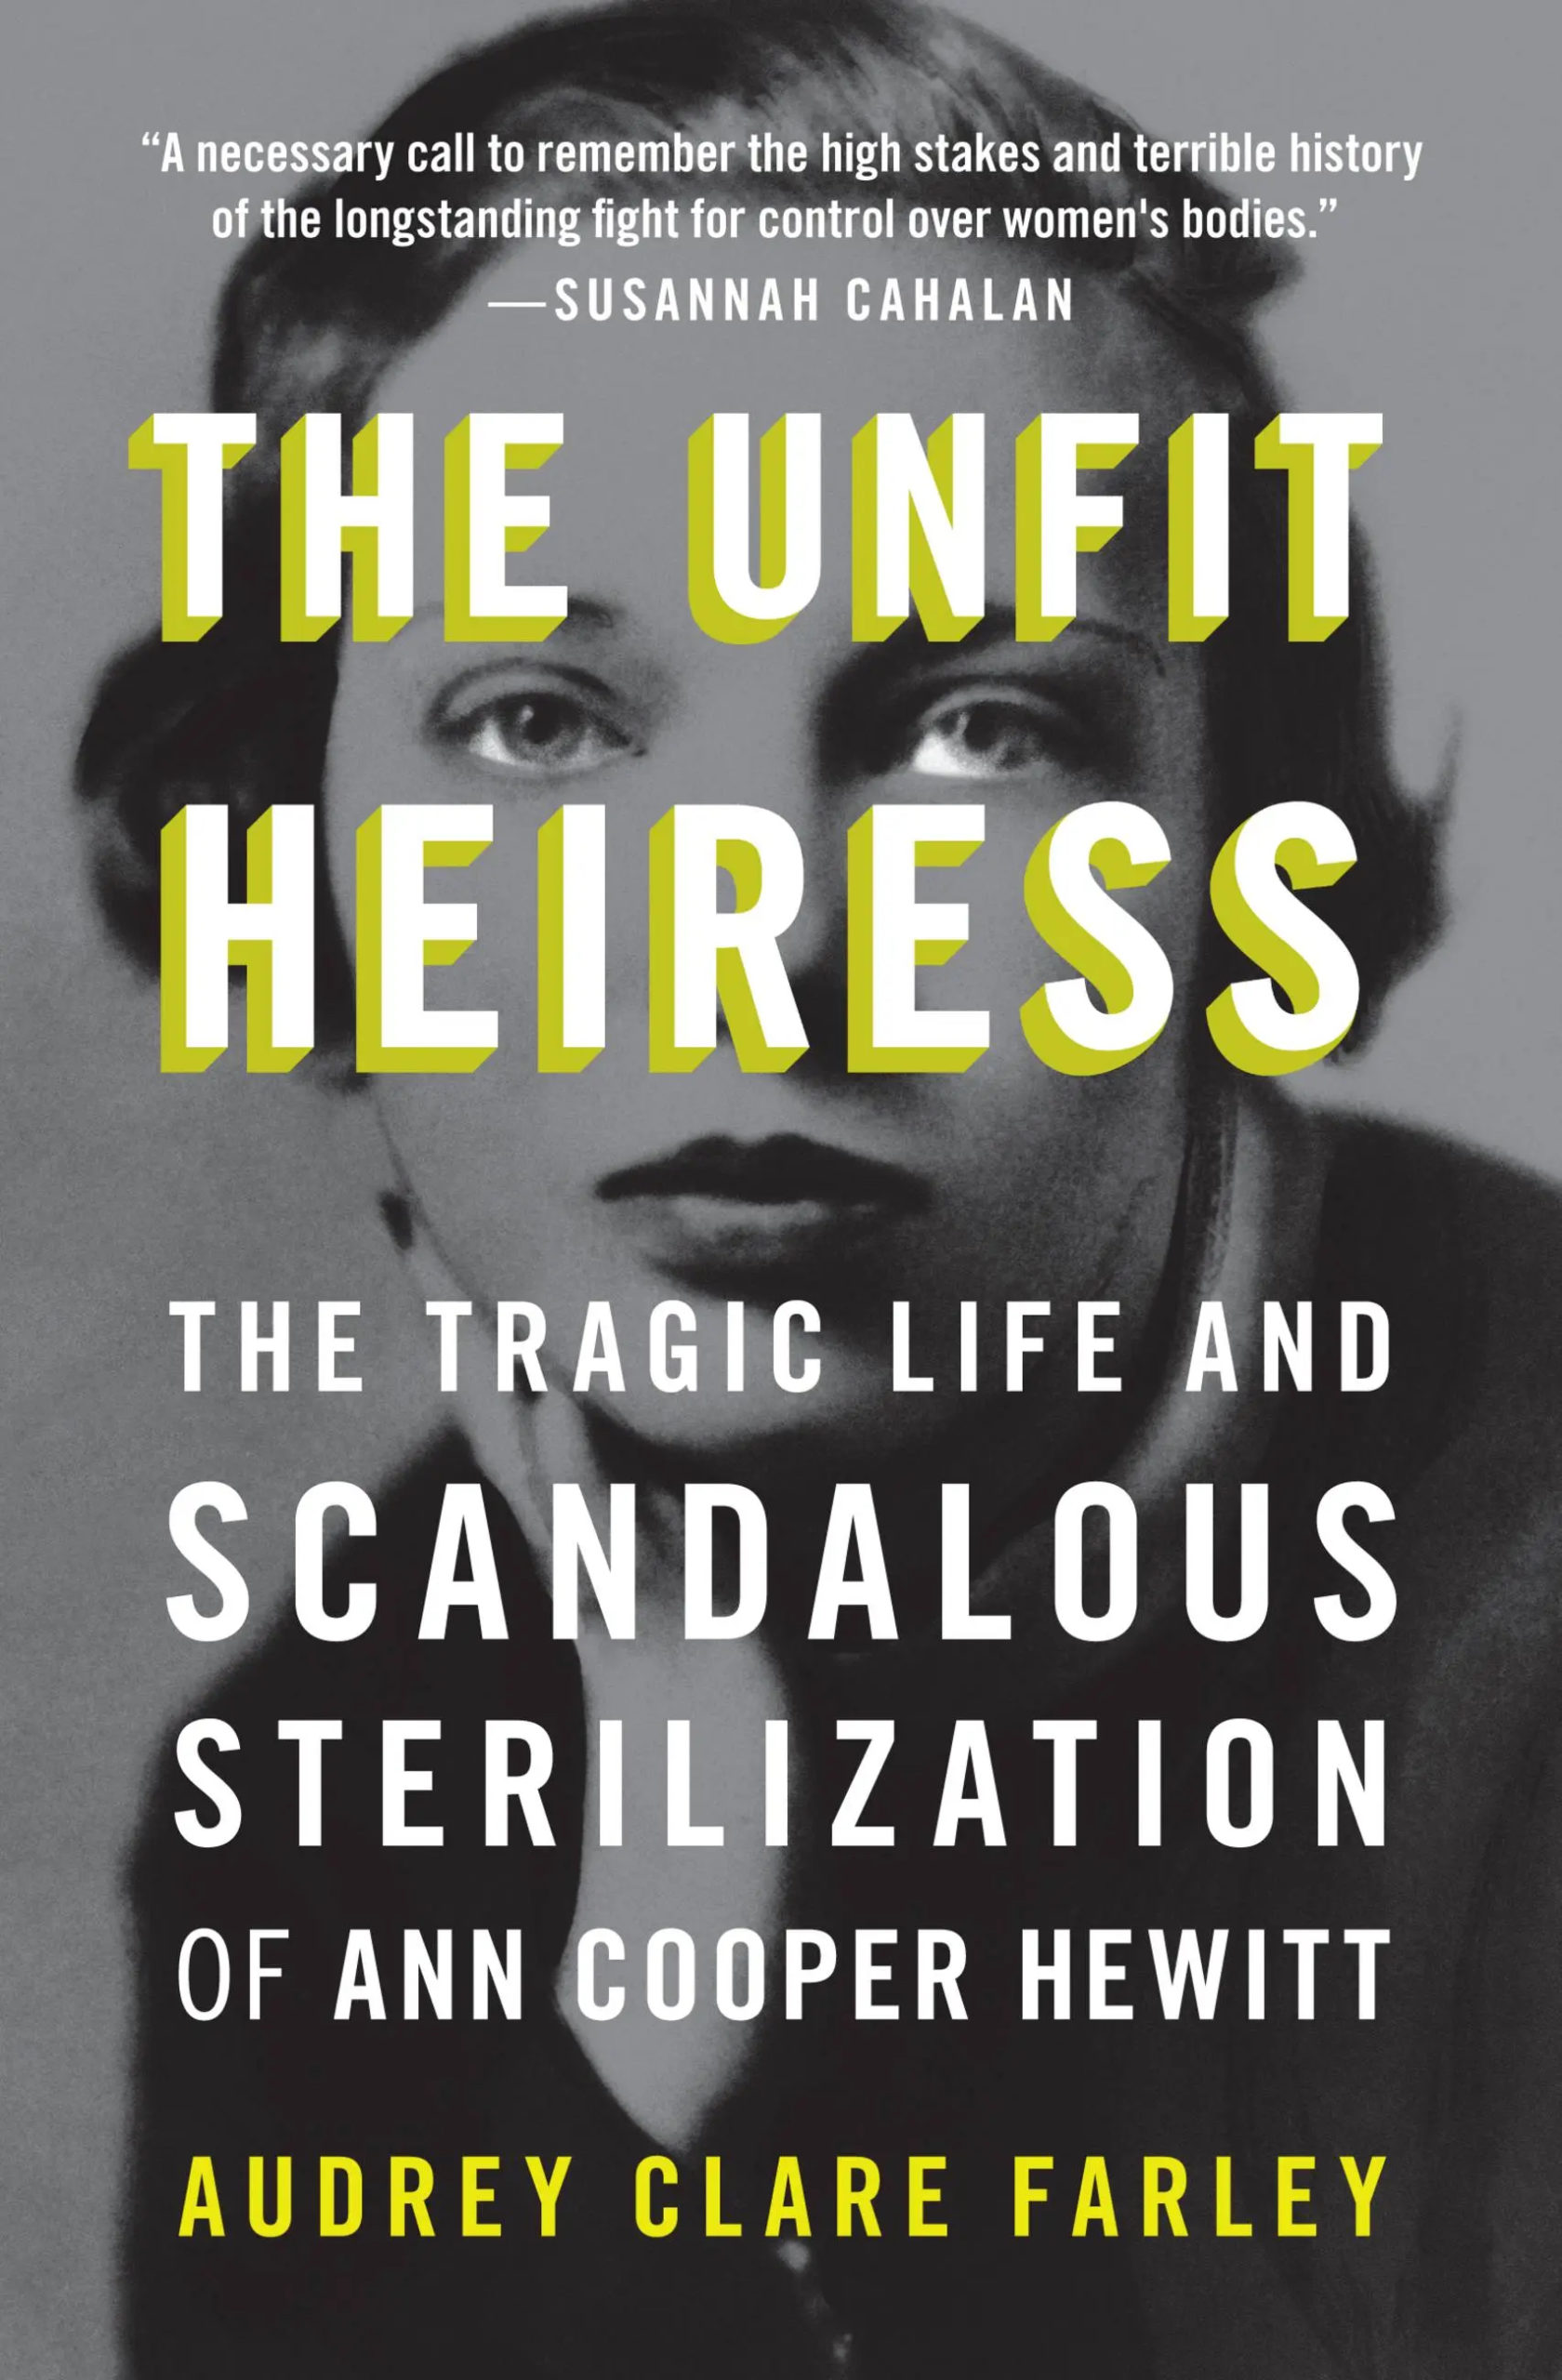 The Unfit Heiress: The Tragic Life and Scandalous Sterilization of Ann Cooper Hewitt by Audrey Clare Farley